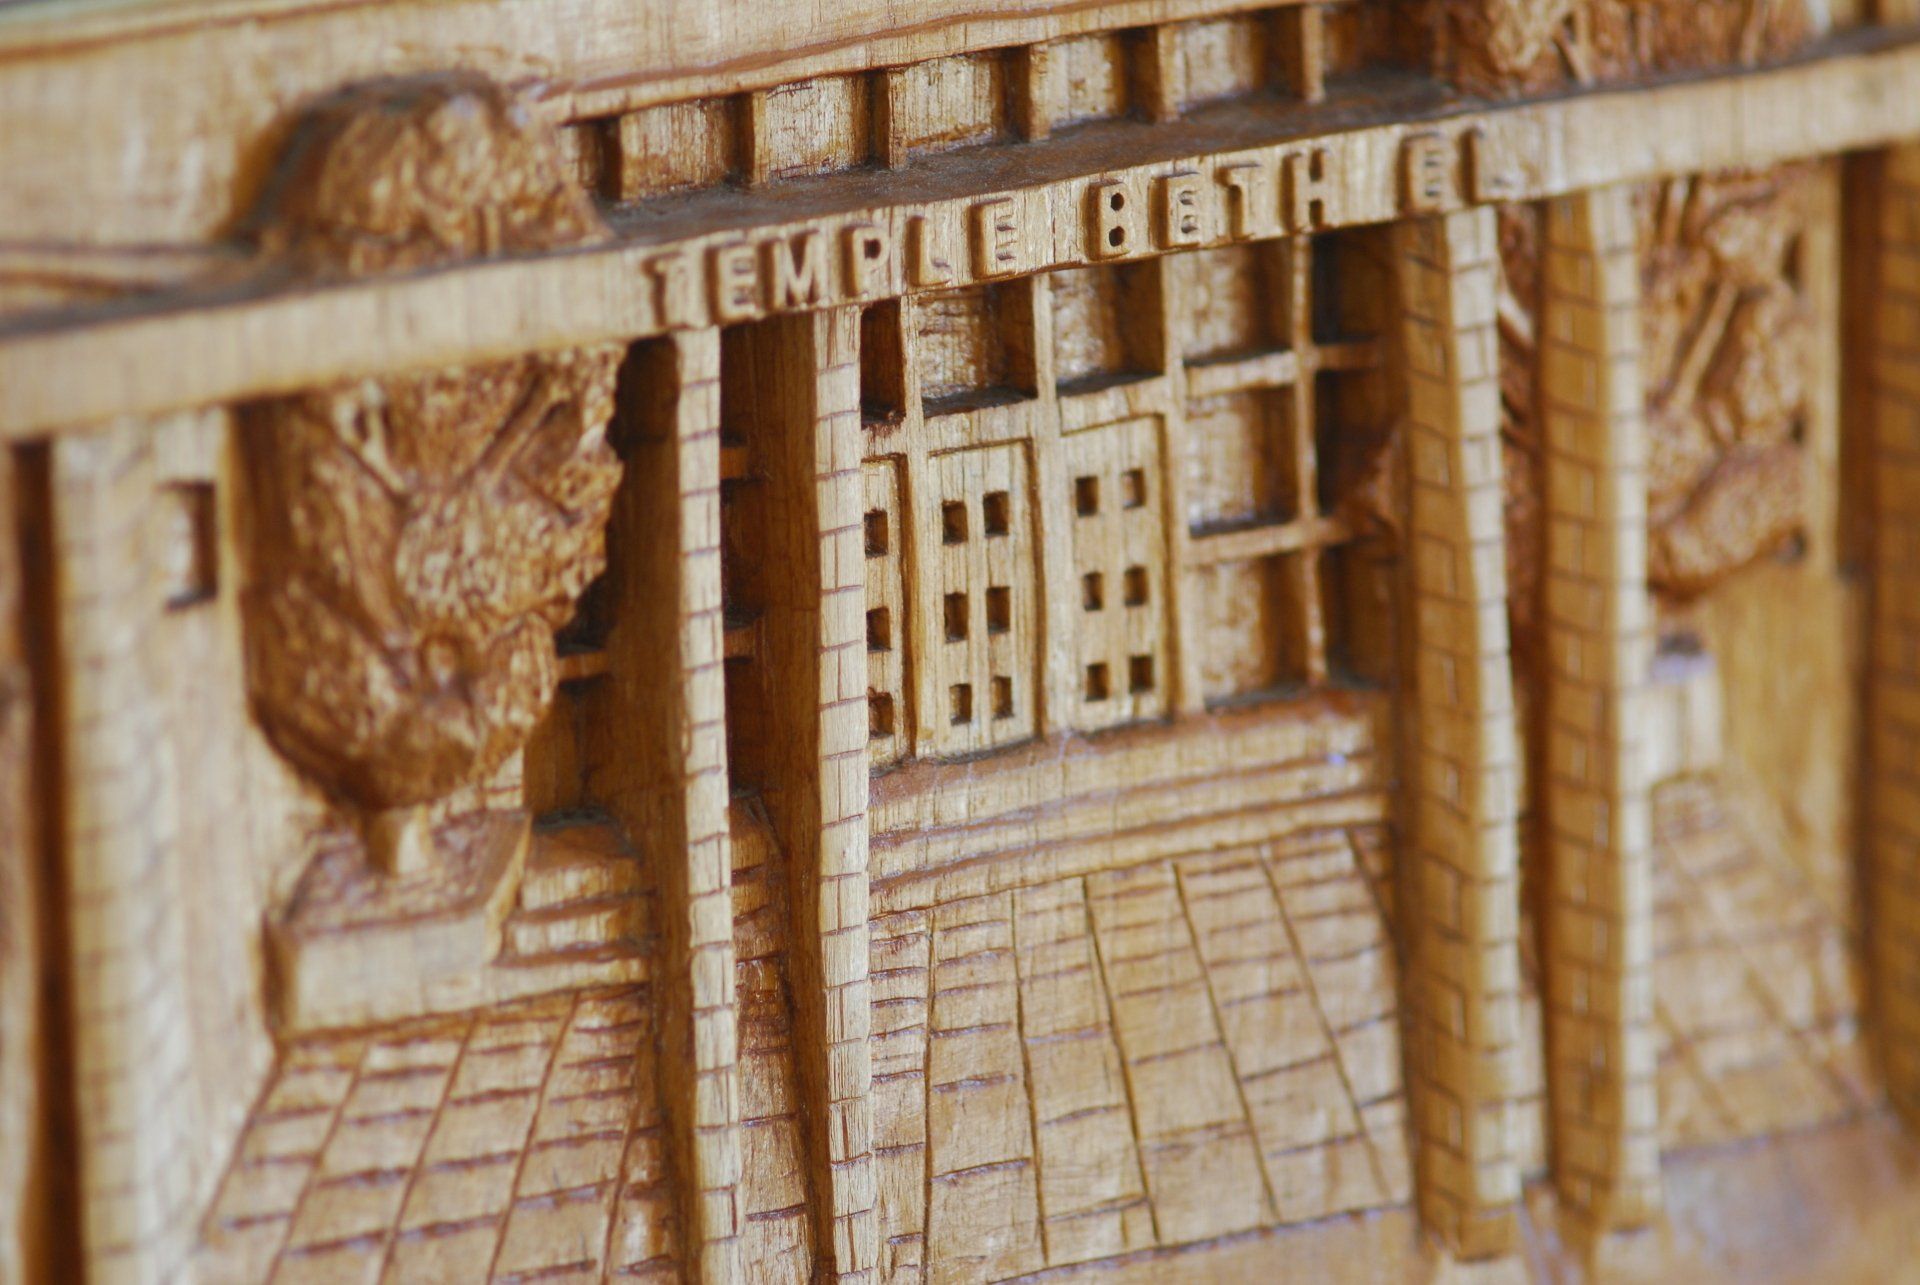 a close up of a wood carving depicting the entrance into Temple Beth El through the courtyard. It says 